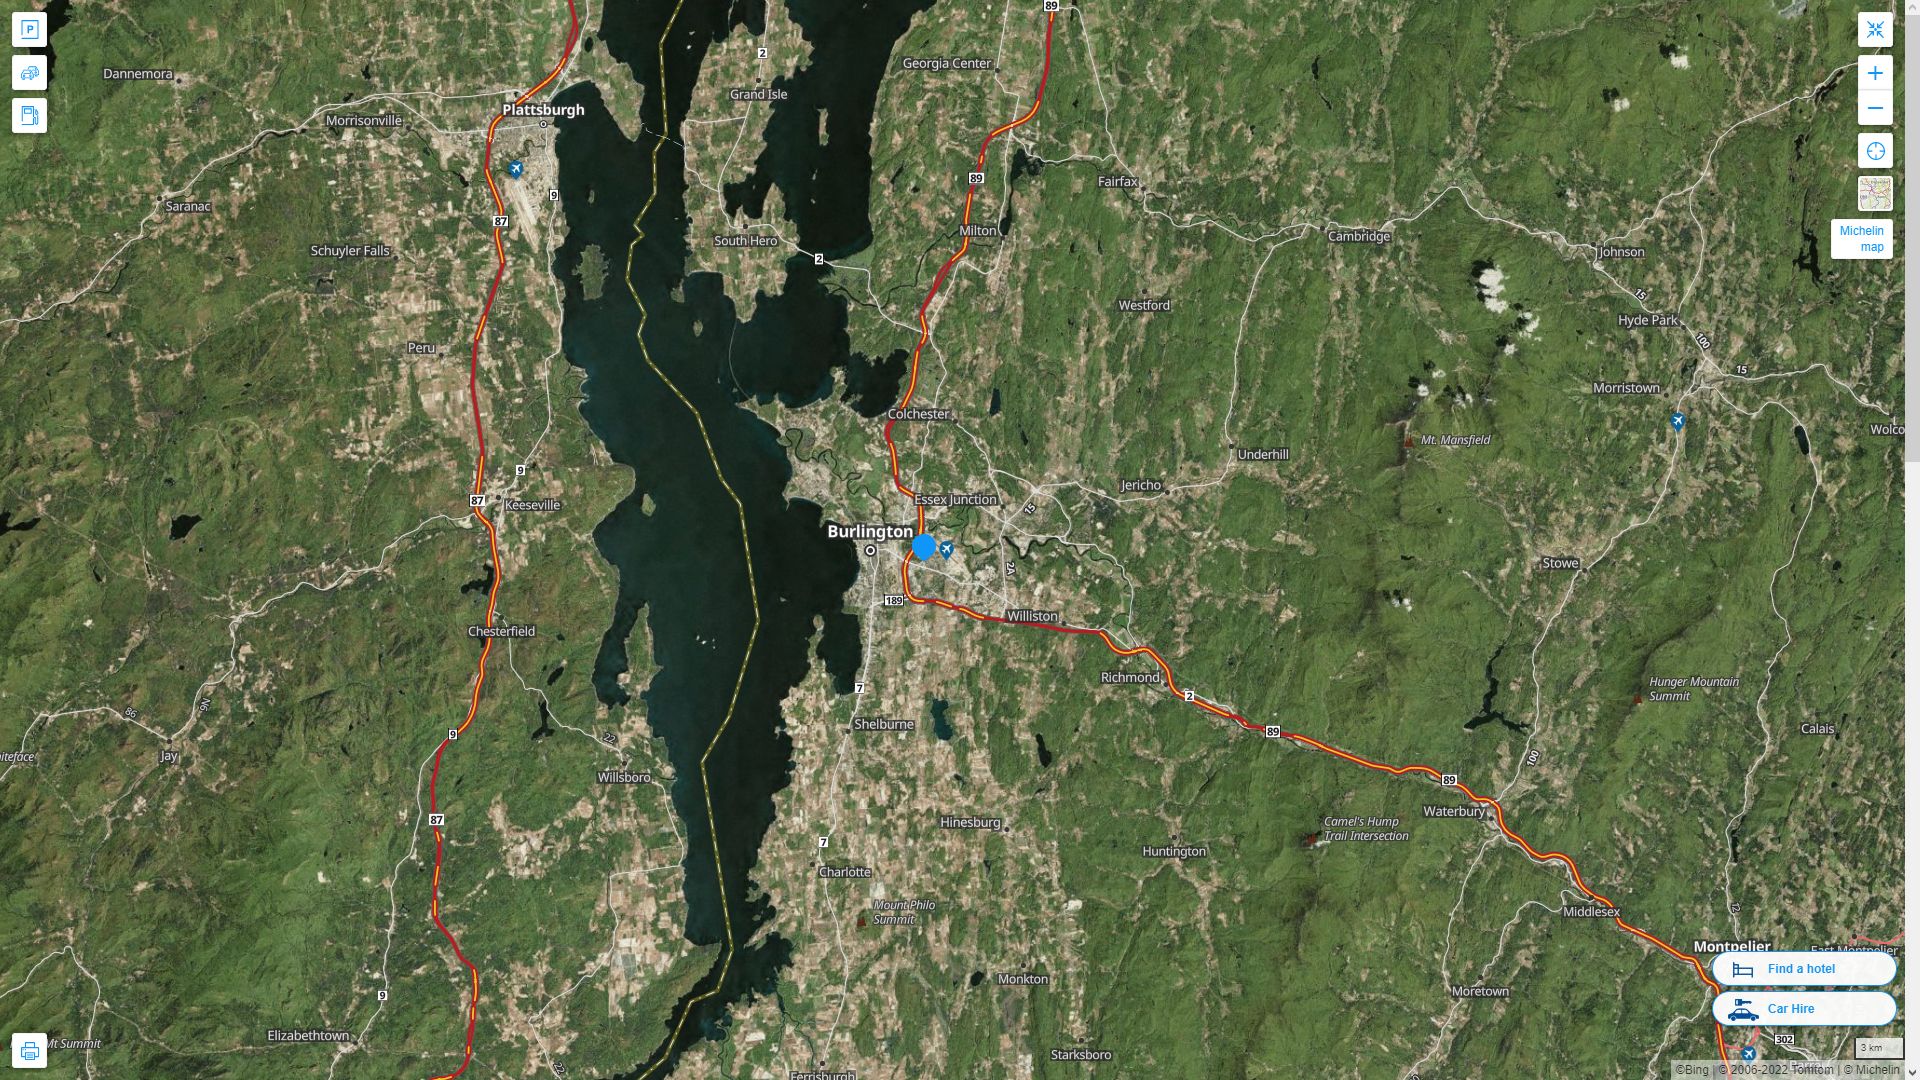 South Burlington Vermont Highway and Road Map with Satellite View